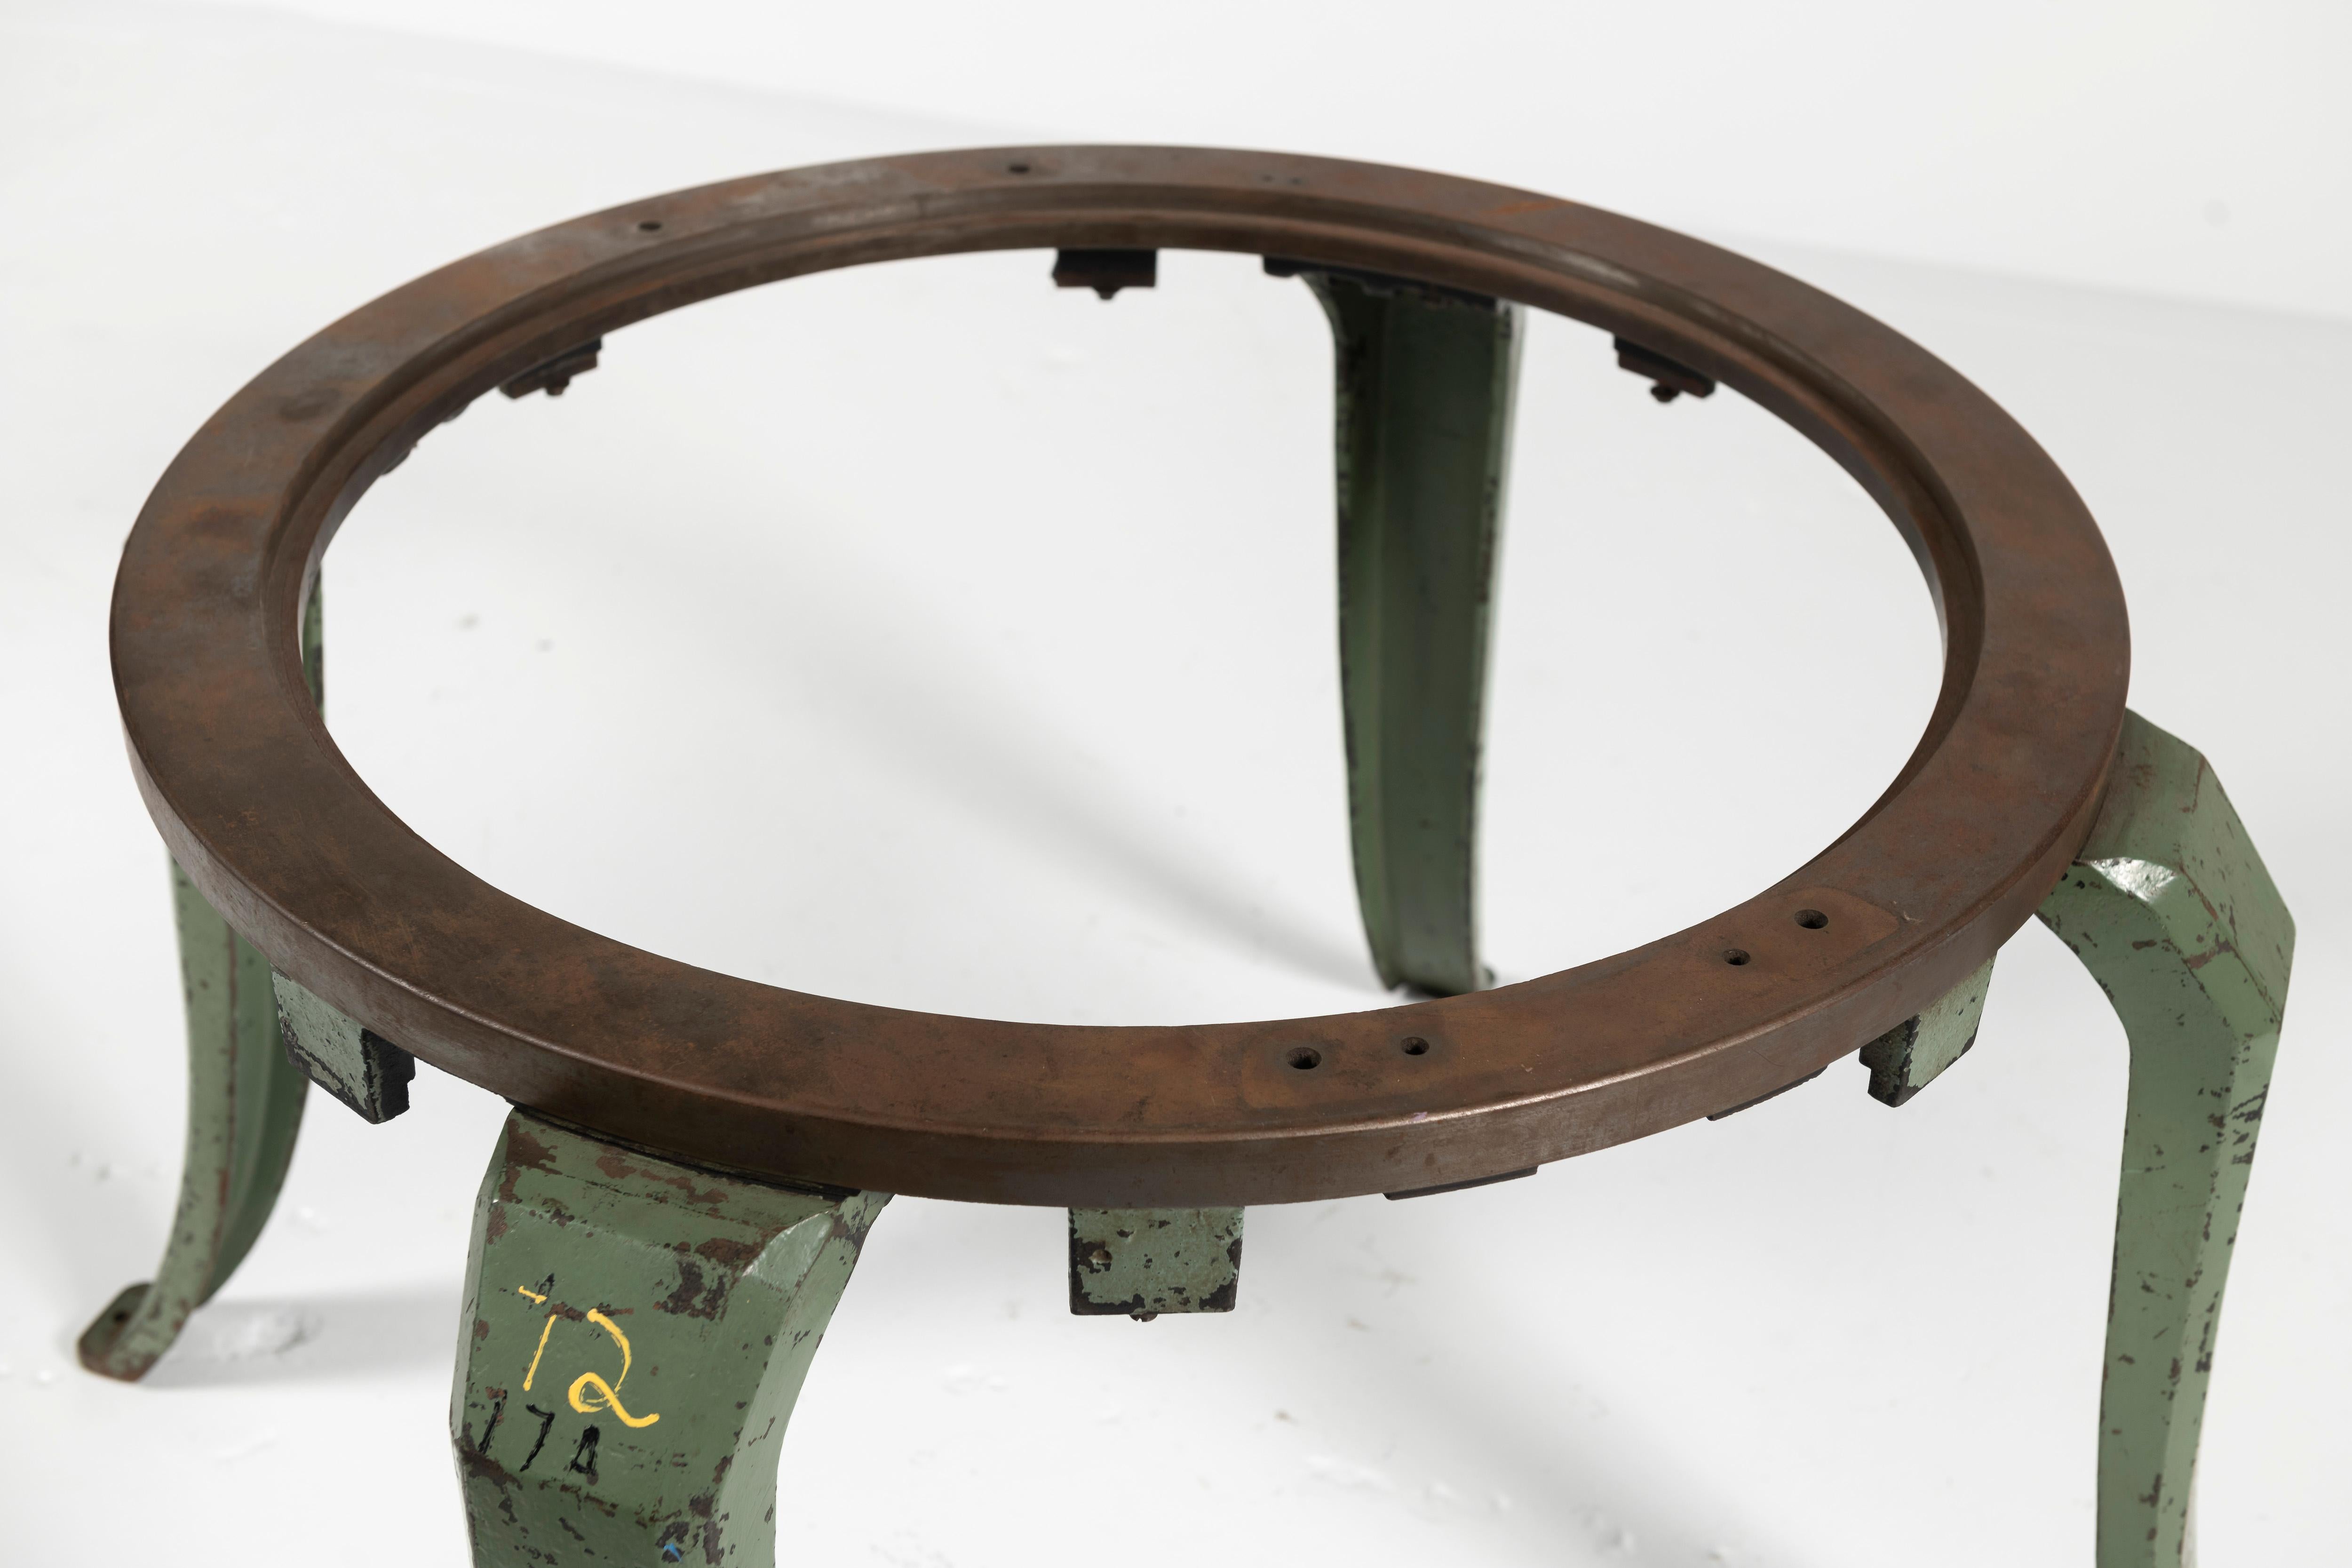 This collectible cast iron industrial machinery piece that has been converted from its original use to a table base. The table is round with beautifully curved legs. The cast iron has aged perfectly, with oxidation and some chipped industrial green